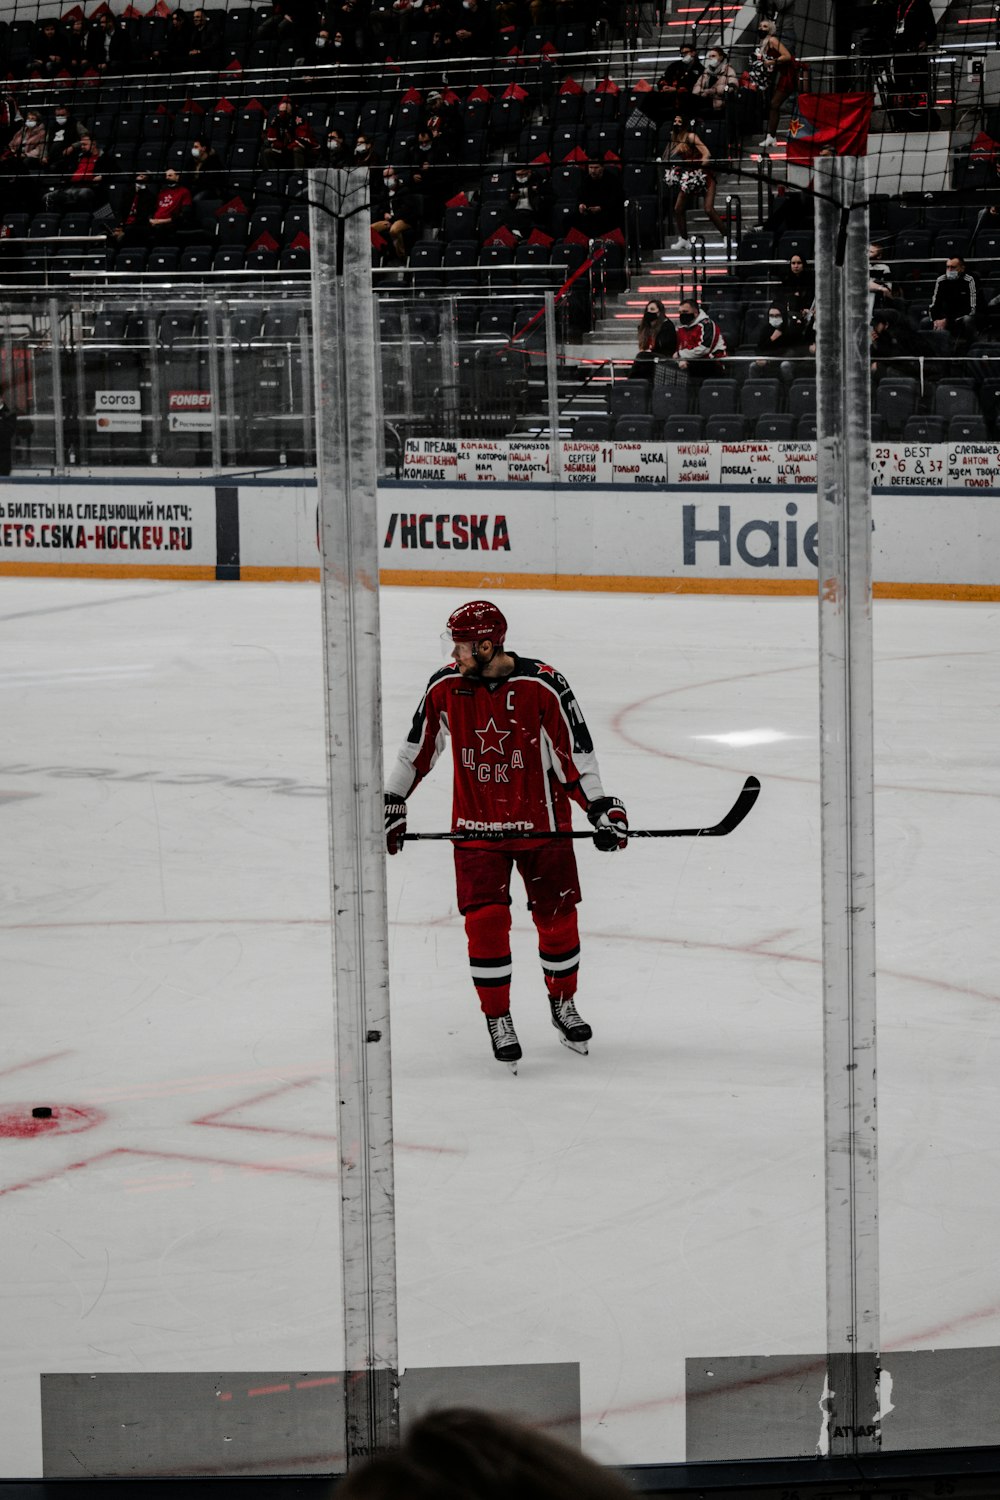 man in red ice hockey jersey playing ice hockey